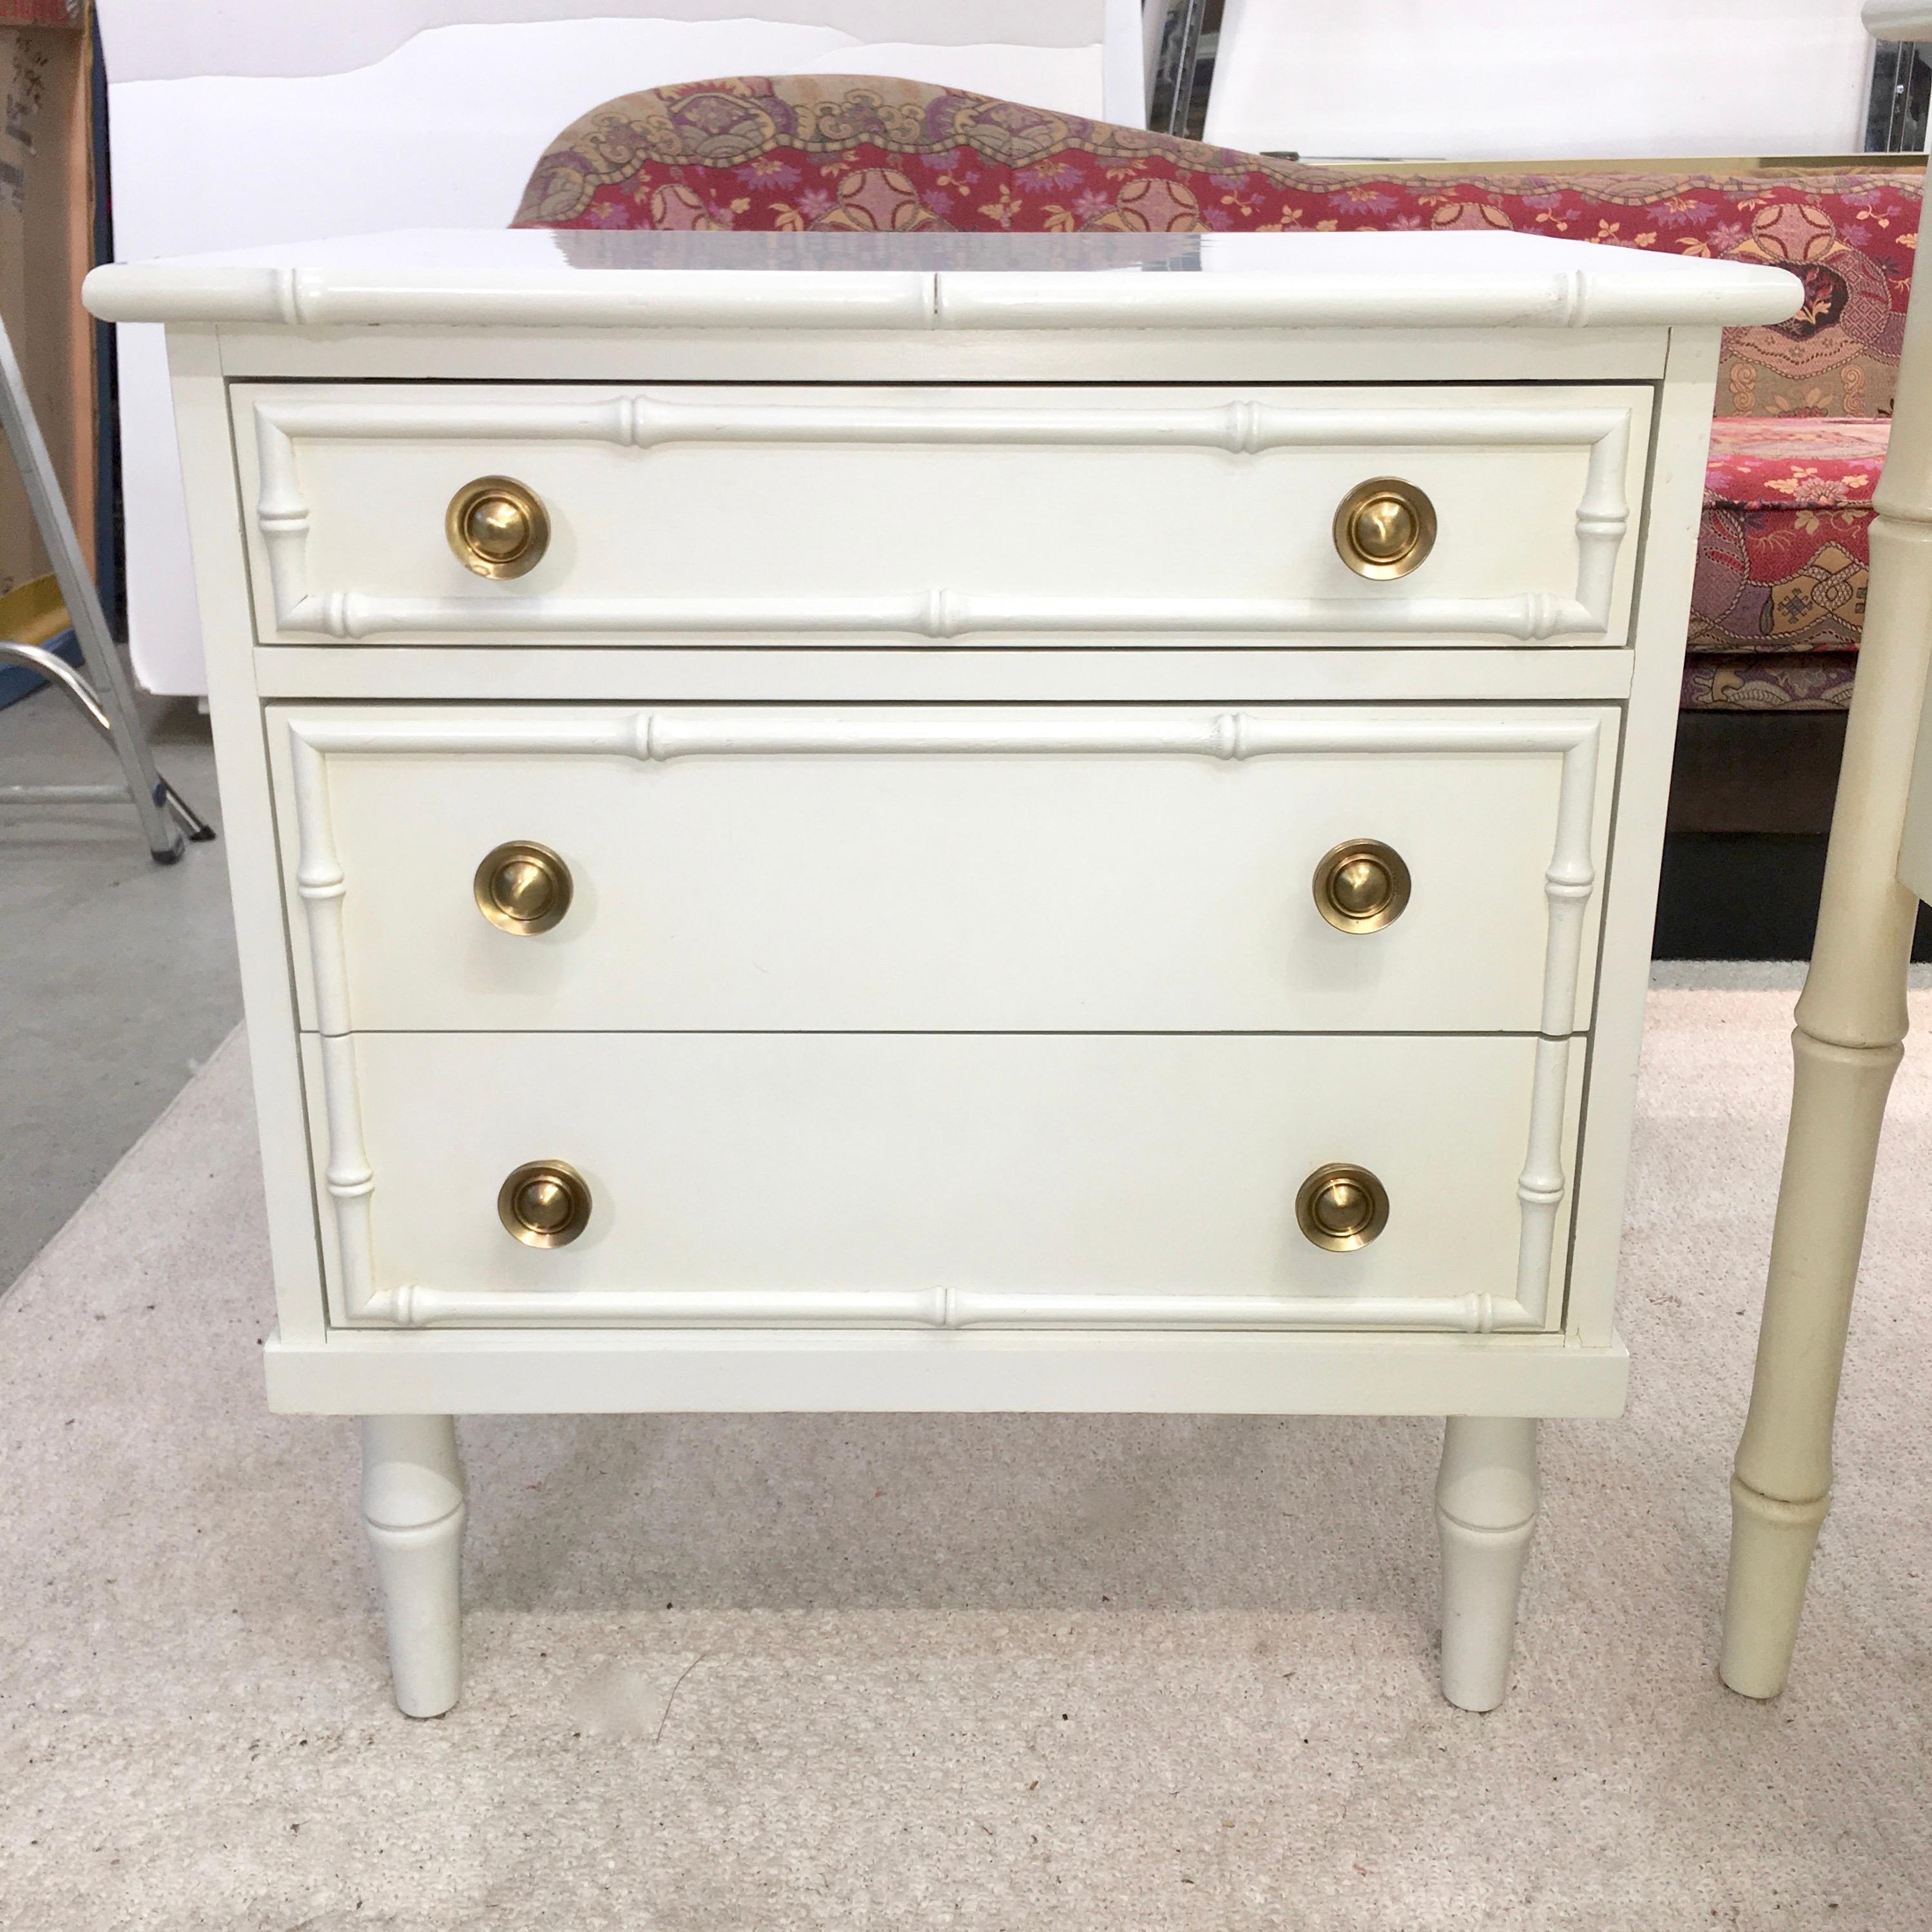 We have two of these upmarket vintage 1960s Hollywood Regency faux bamboo painted wood three drawer small chests or nightstands, attributed to Ficks Reed. One in its original white finish with white laminate top and posh solid brass hardware. The